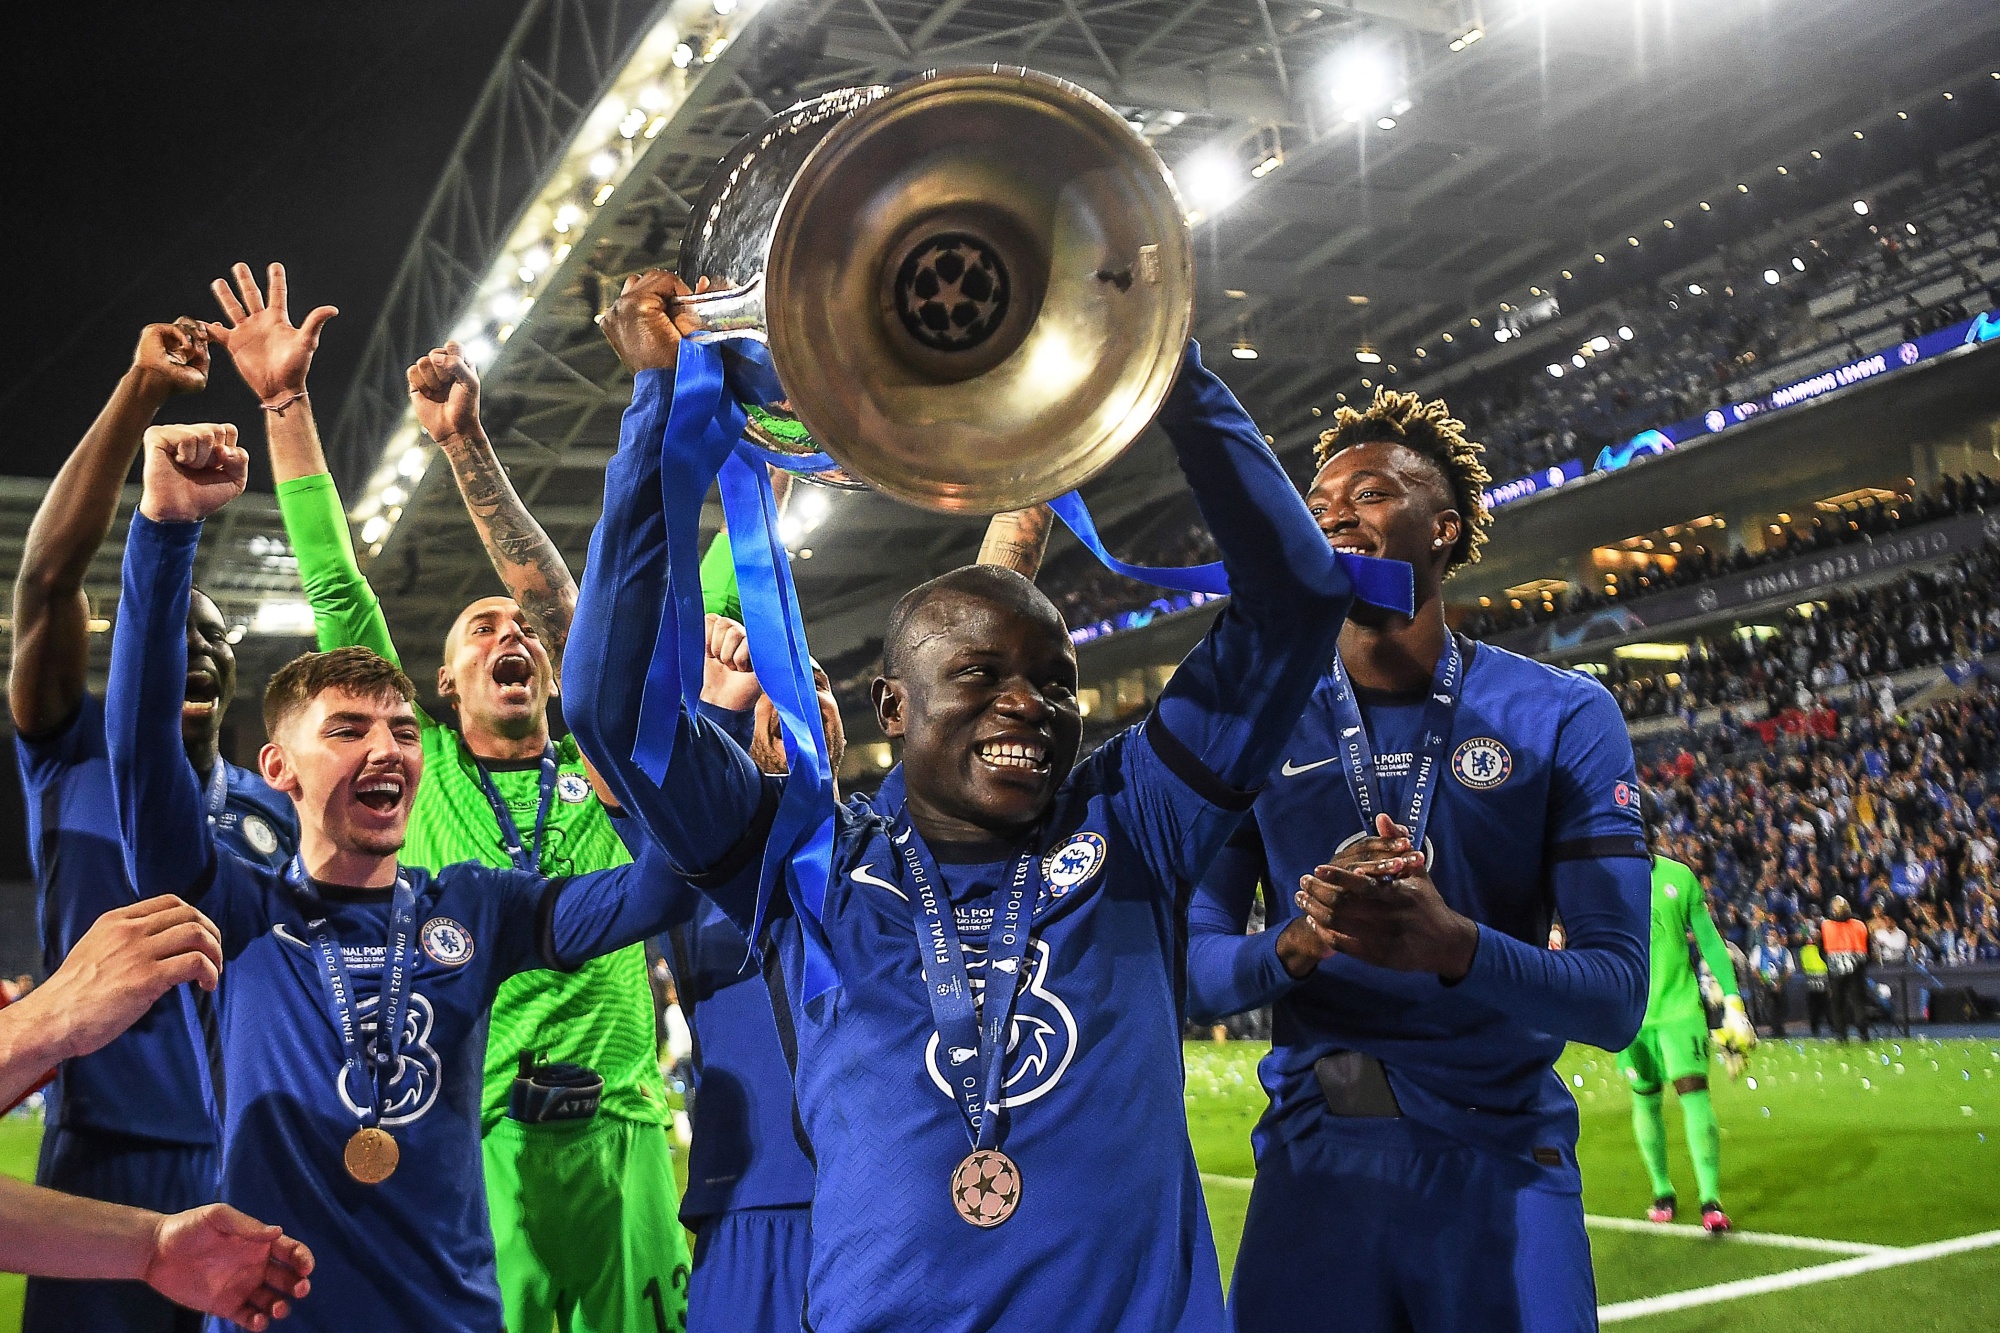 Chelsea FC celebrate winnning the UEFA Champions League final in May 2021.